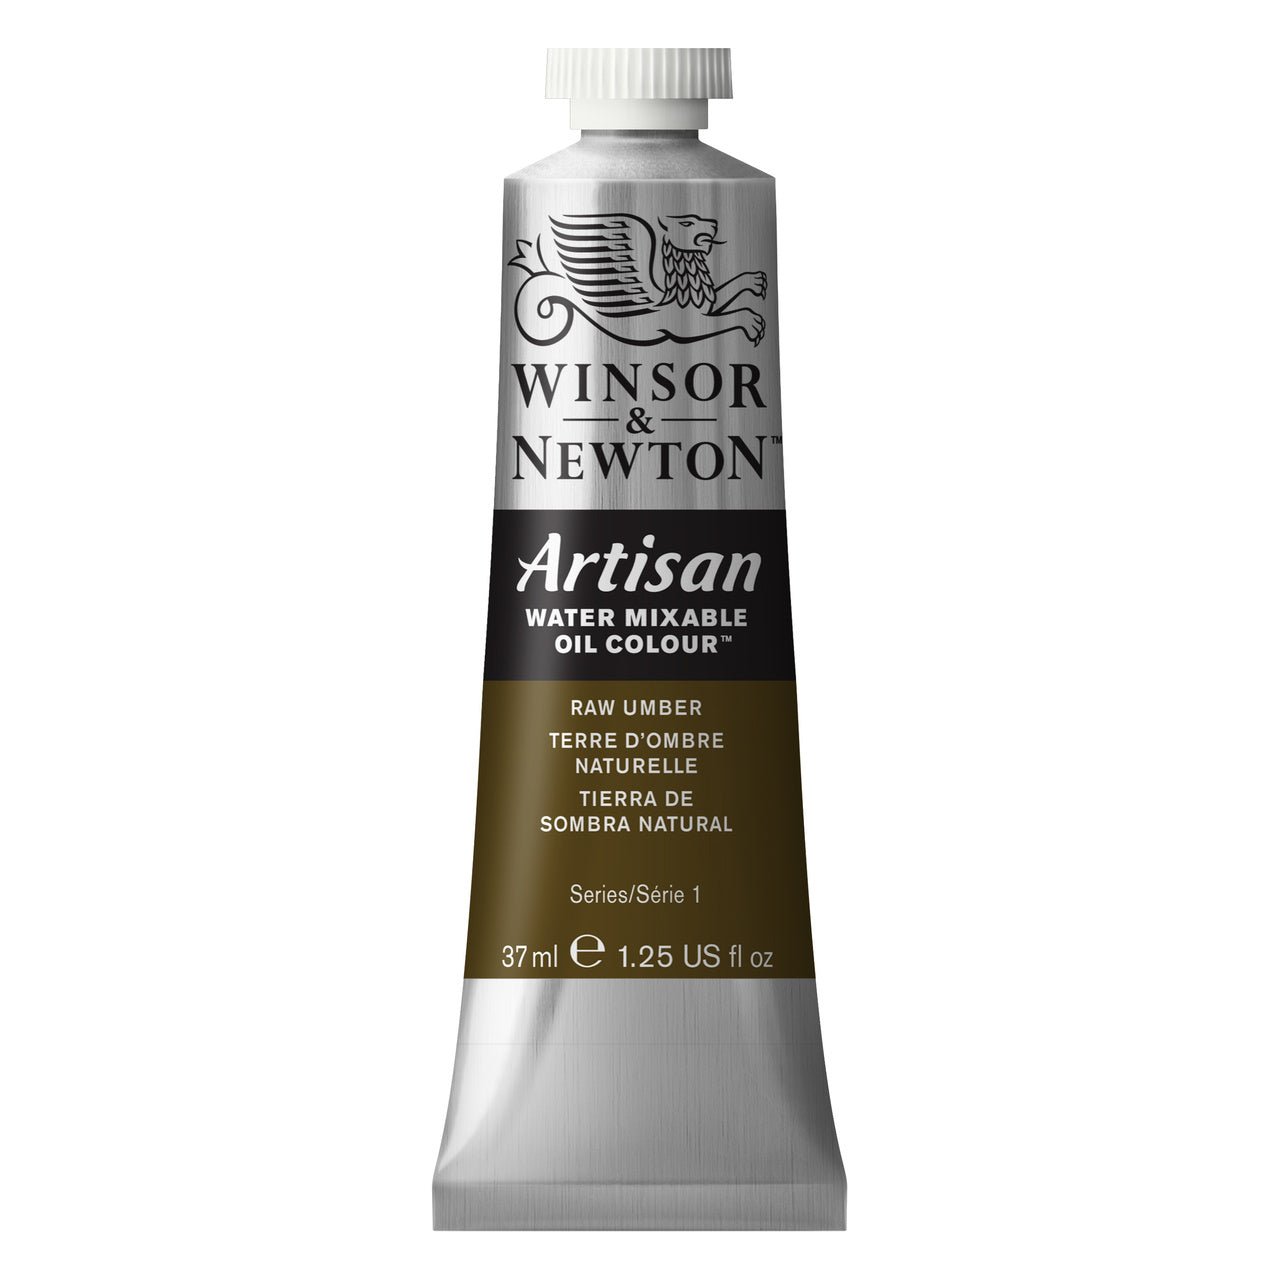 Winsor & Newton Artisan Water Mixable Oil 37ml - Raw Umber - merriartist.com